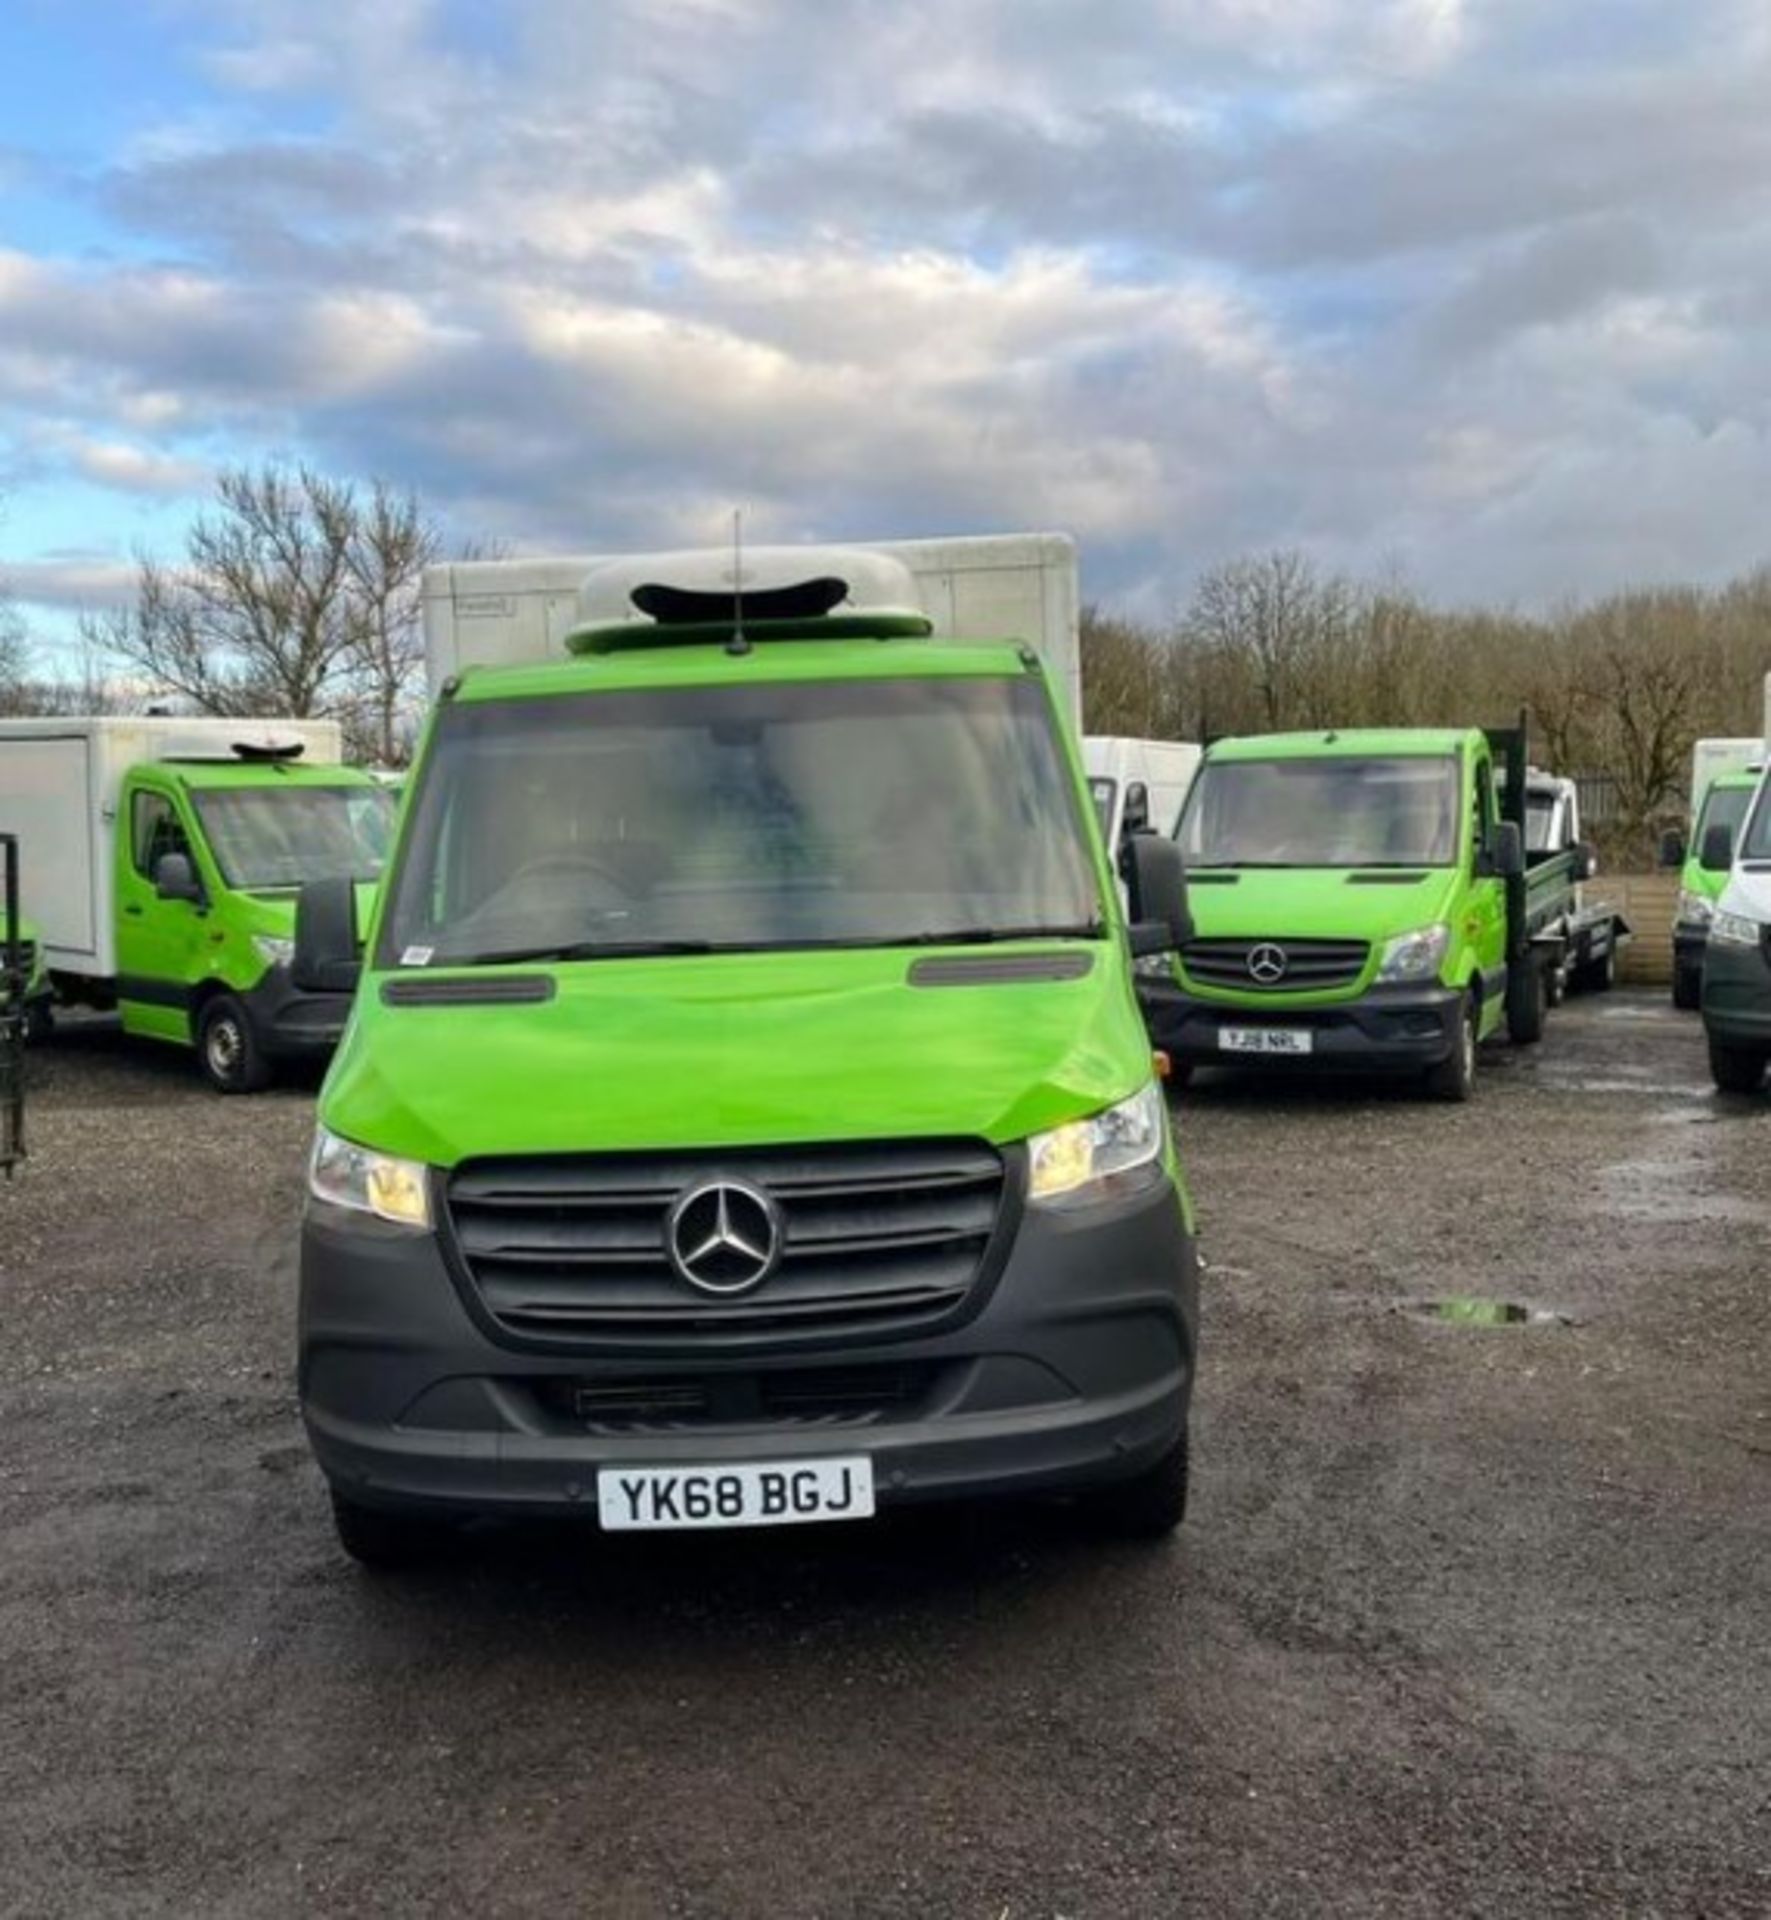 >>>SPECIAL CLEARANCE<<< 2019 MERCEDES-BENZ SPRINTER 314 CDI 35T RWD L2H1 FRIDGE FREEZER CHASSIS CAB - Image 2 of 14